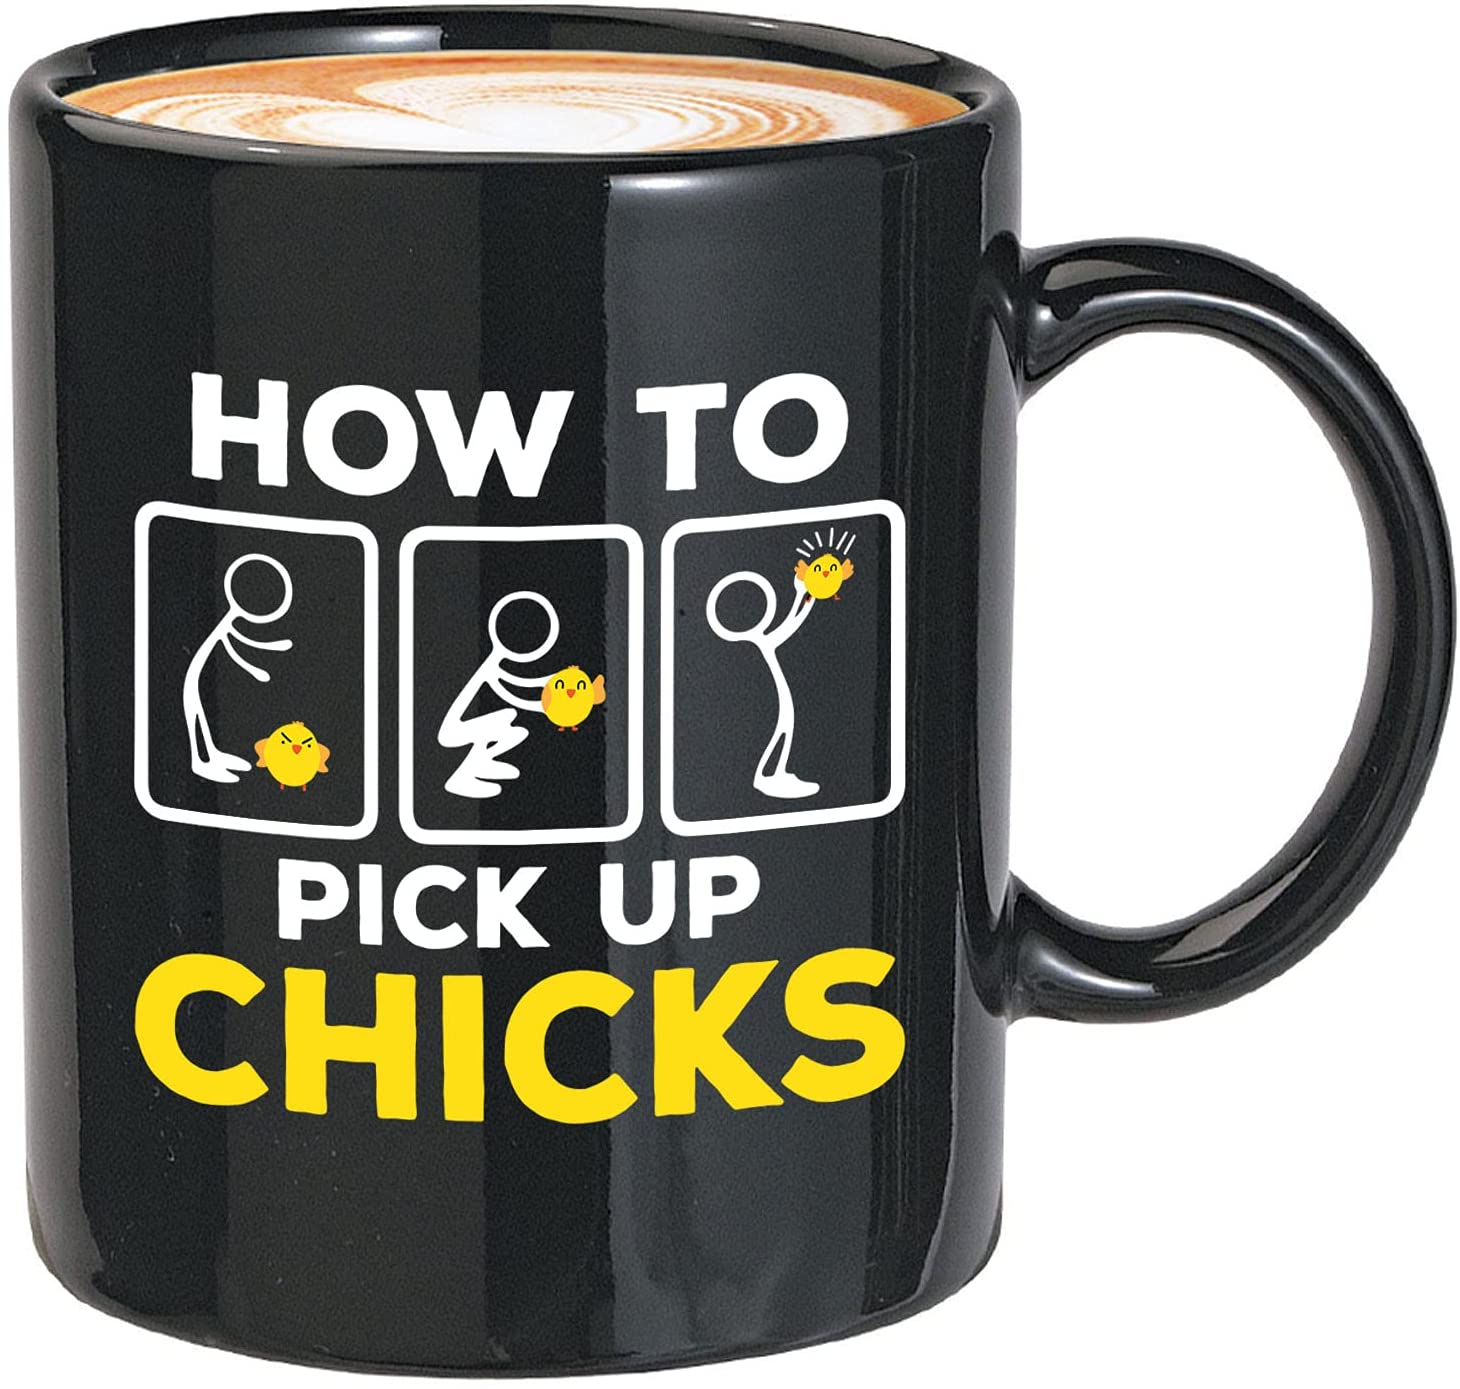 36 Funny Coffee Mugs That Will Truly Define You